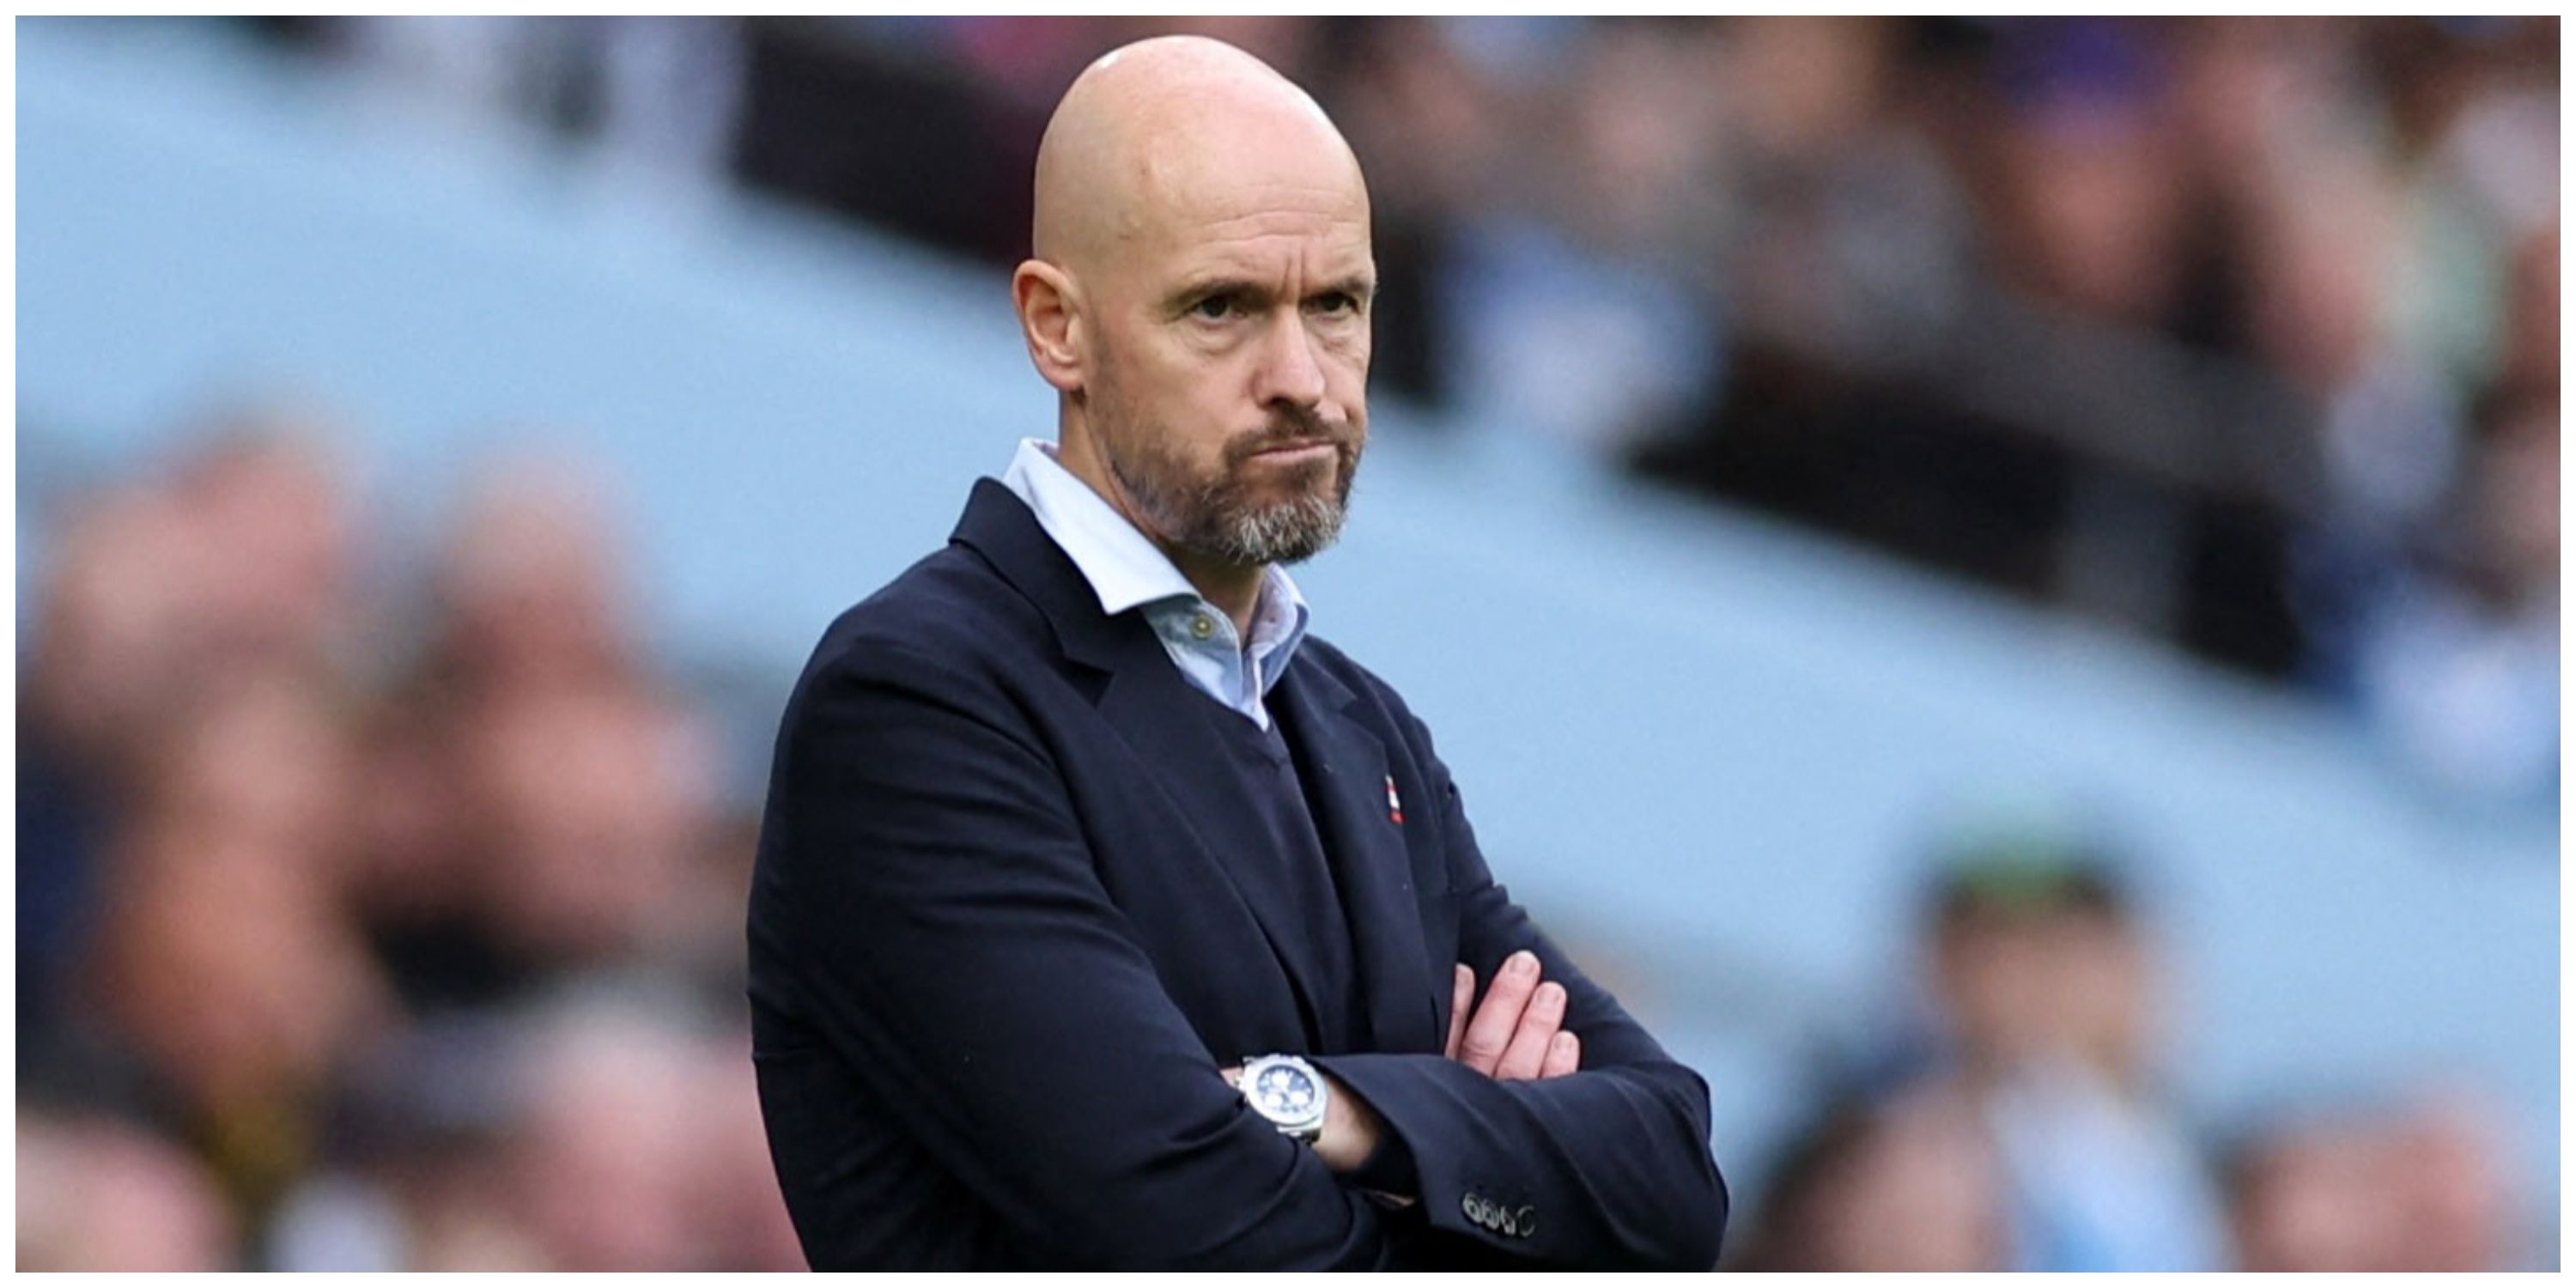 Manchester United manager Erik ten Hag with arms crossed